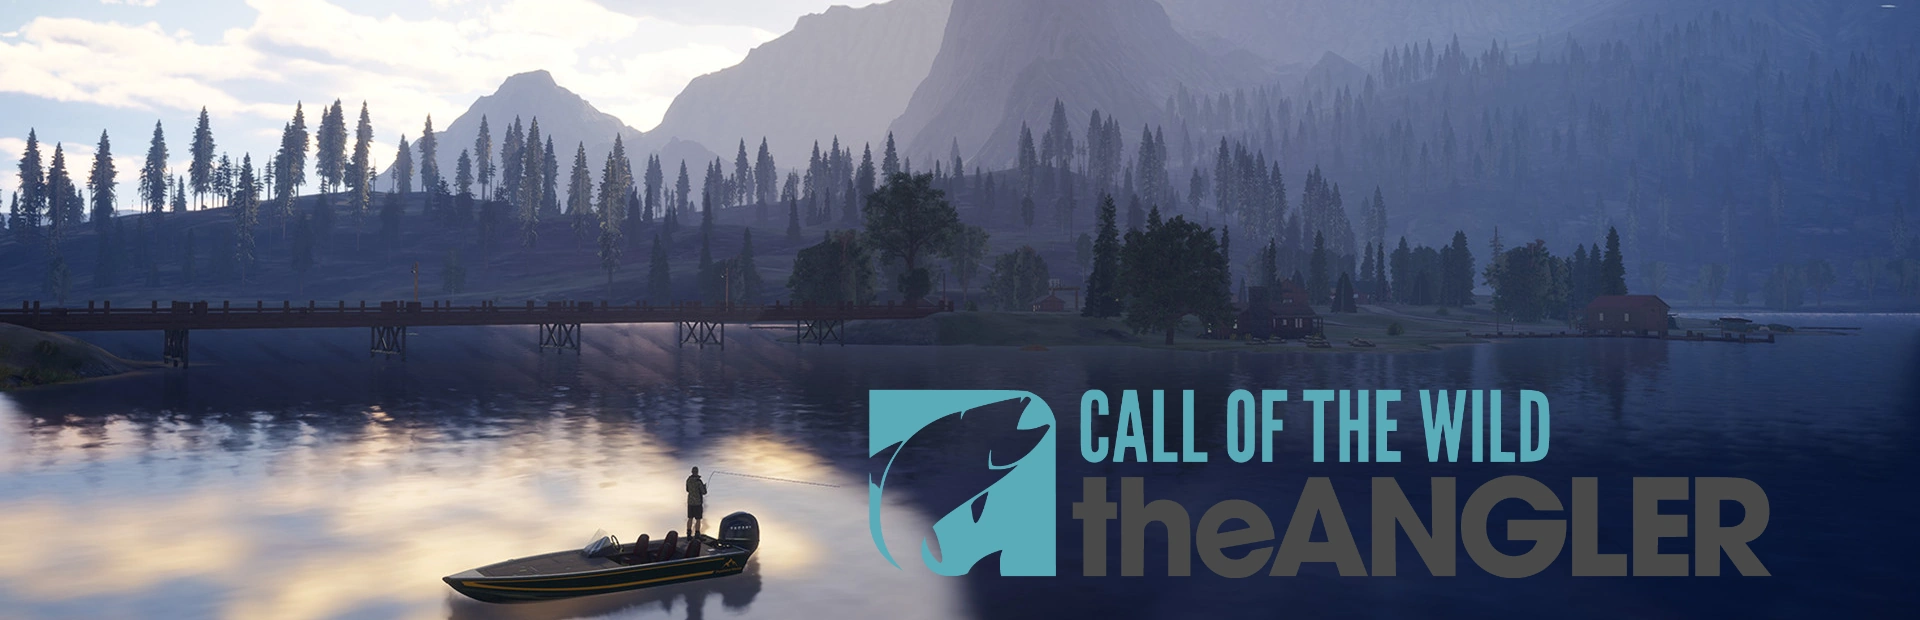 Call.of .the .Wild The.Angler.banner3